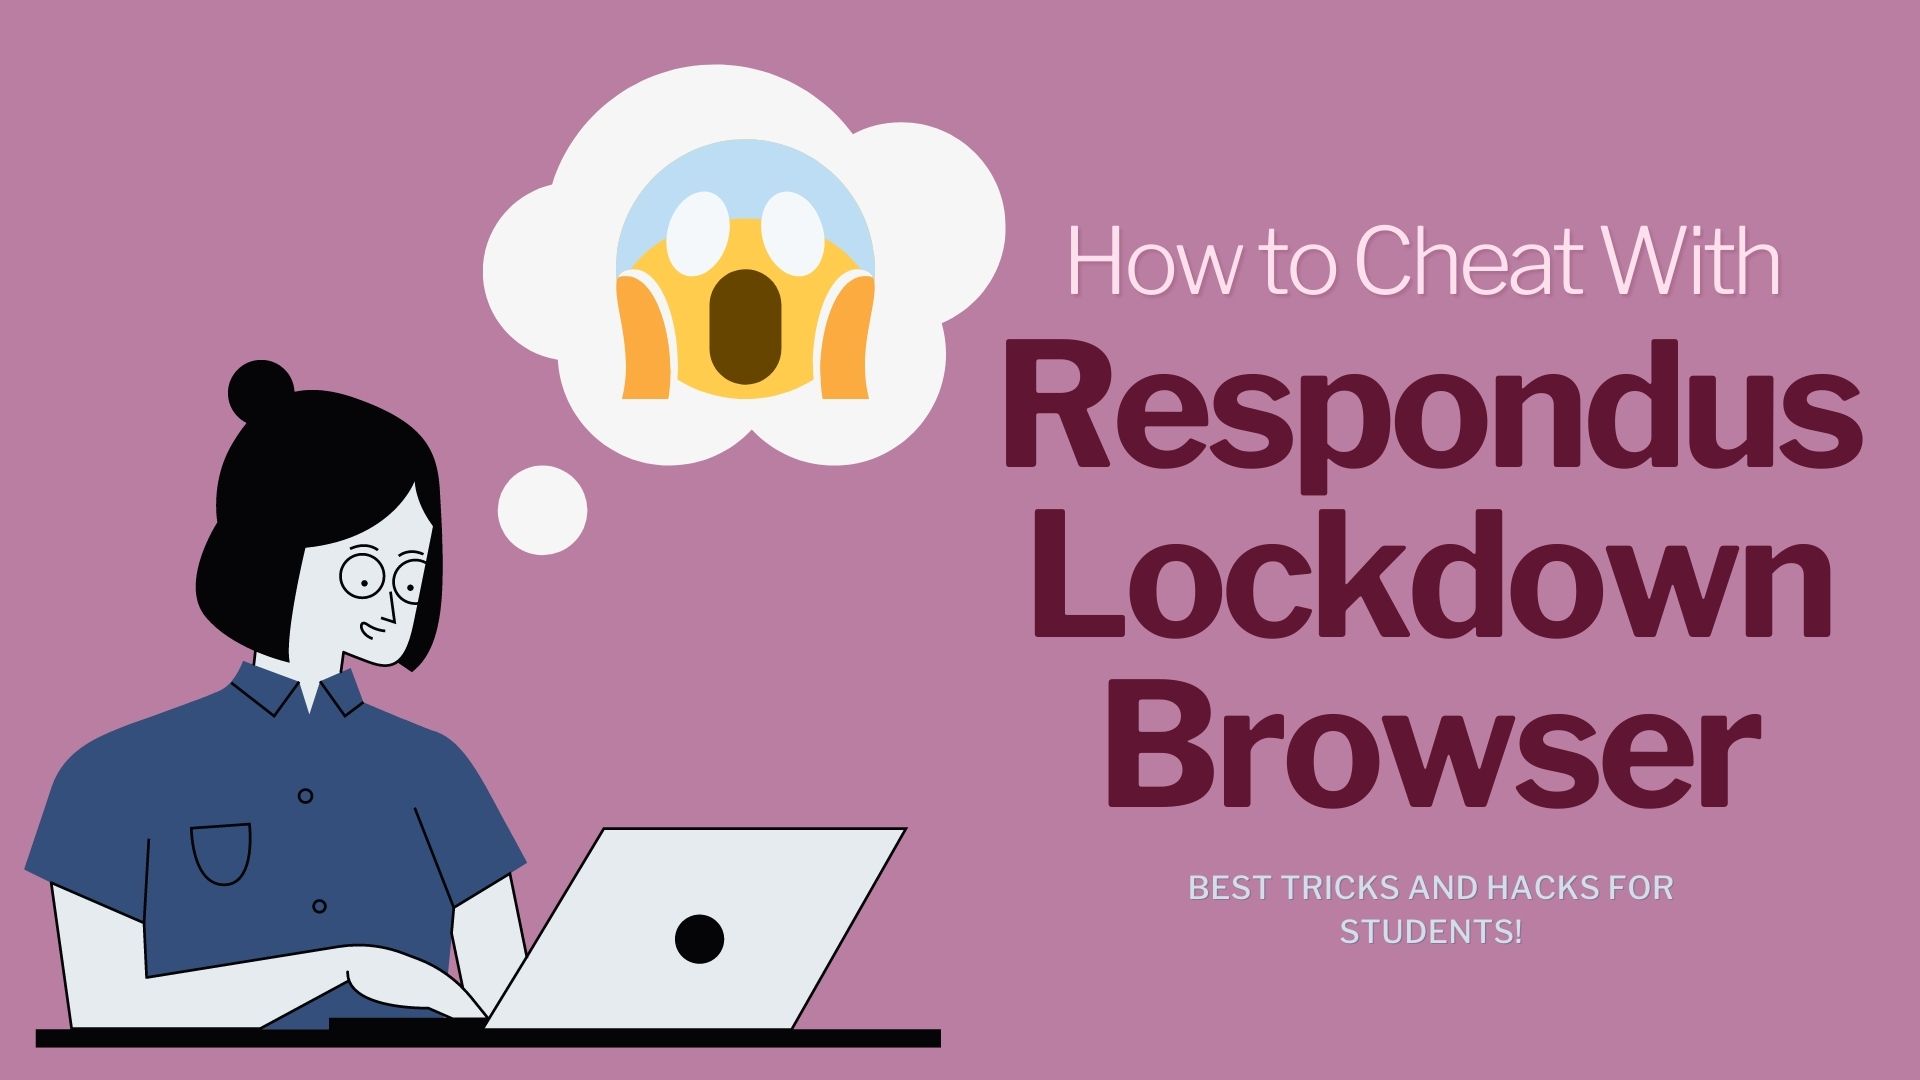 Cheat With Lockdown Browser